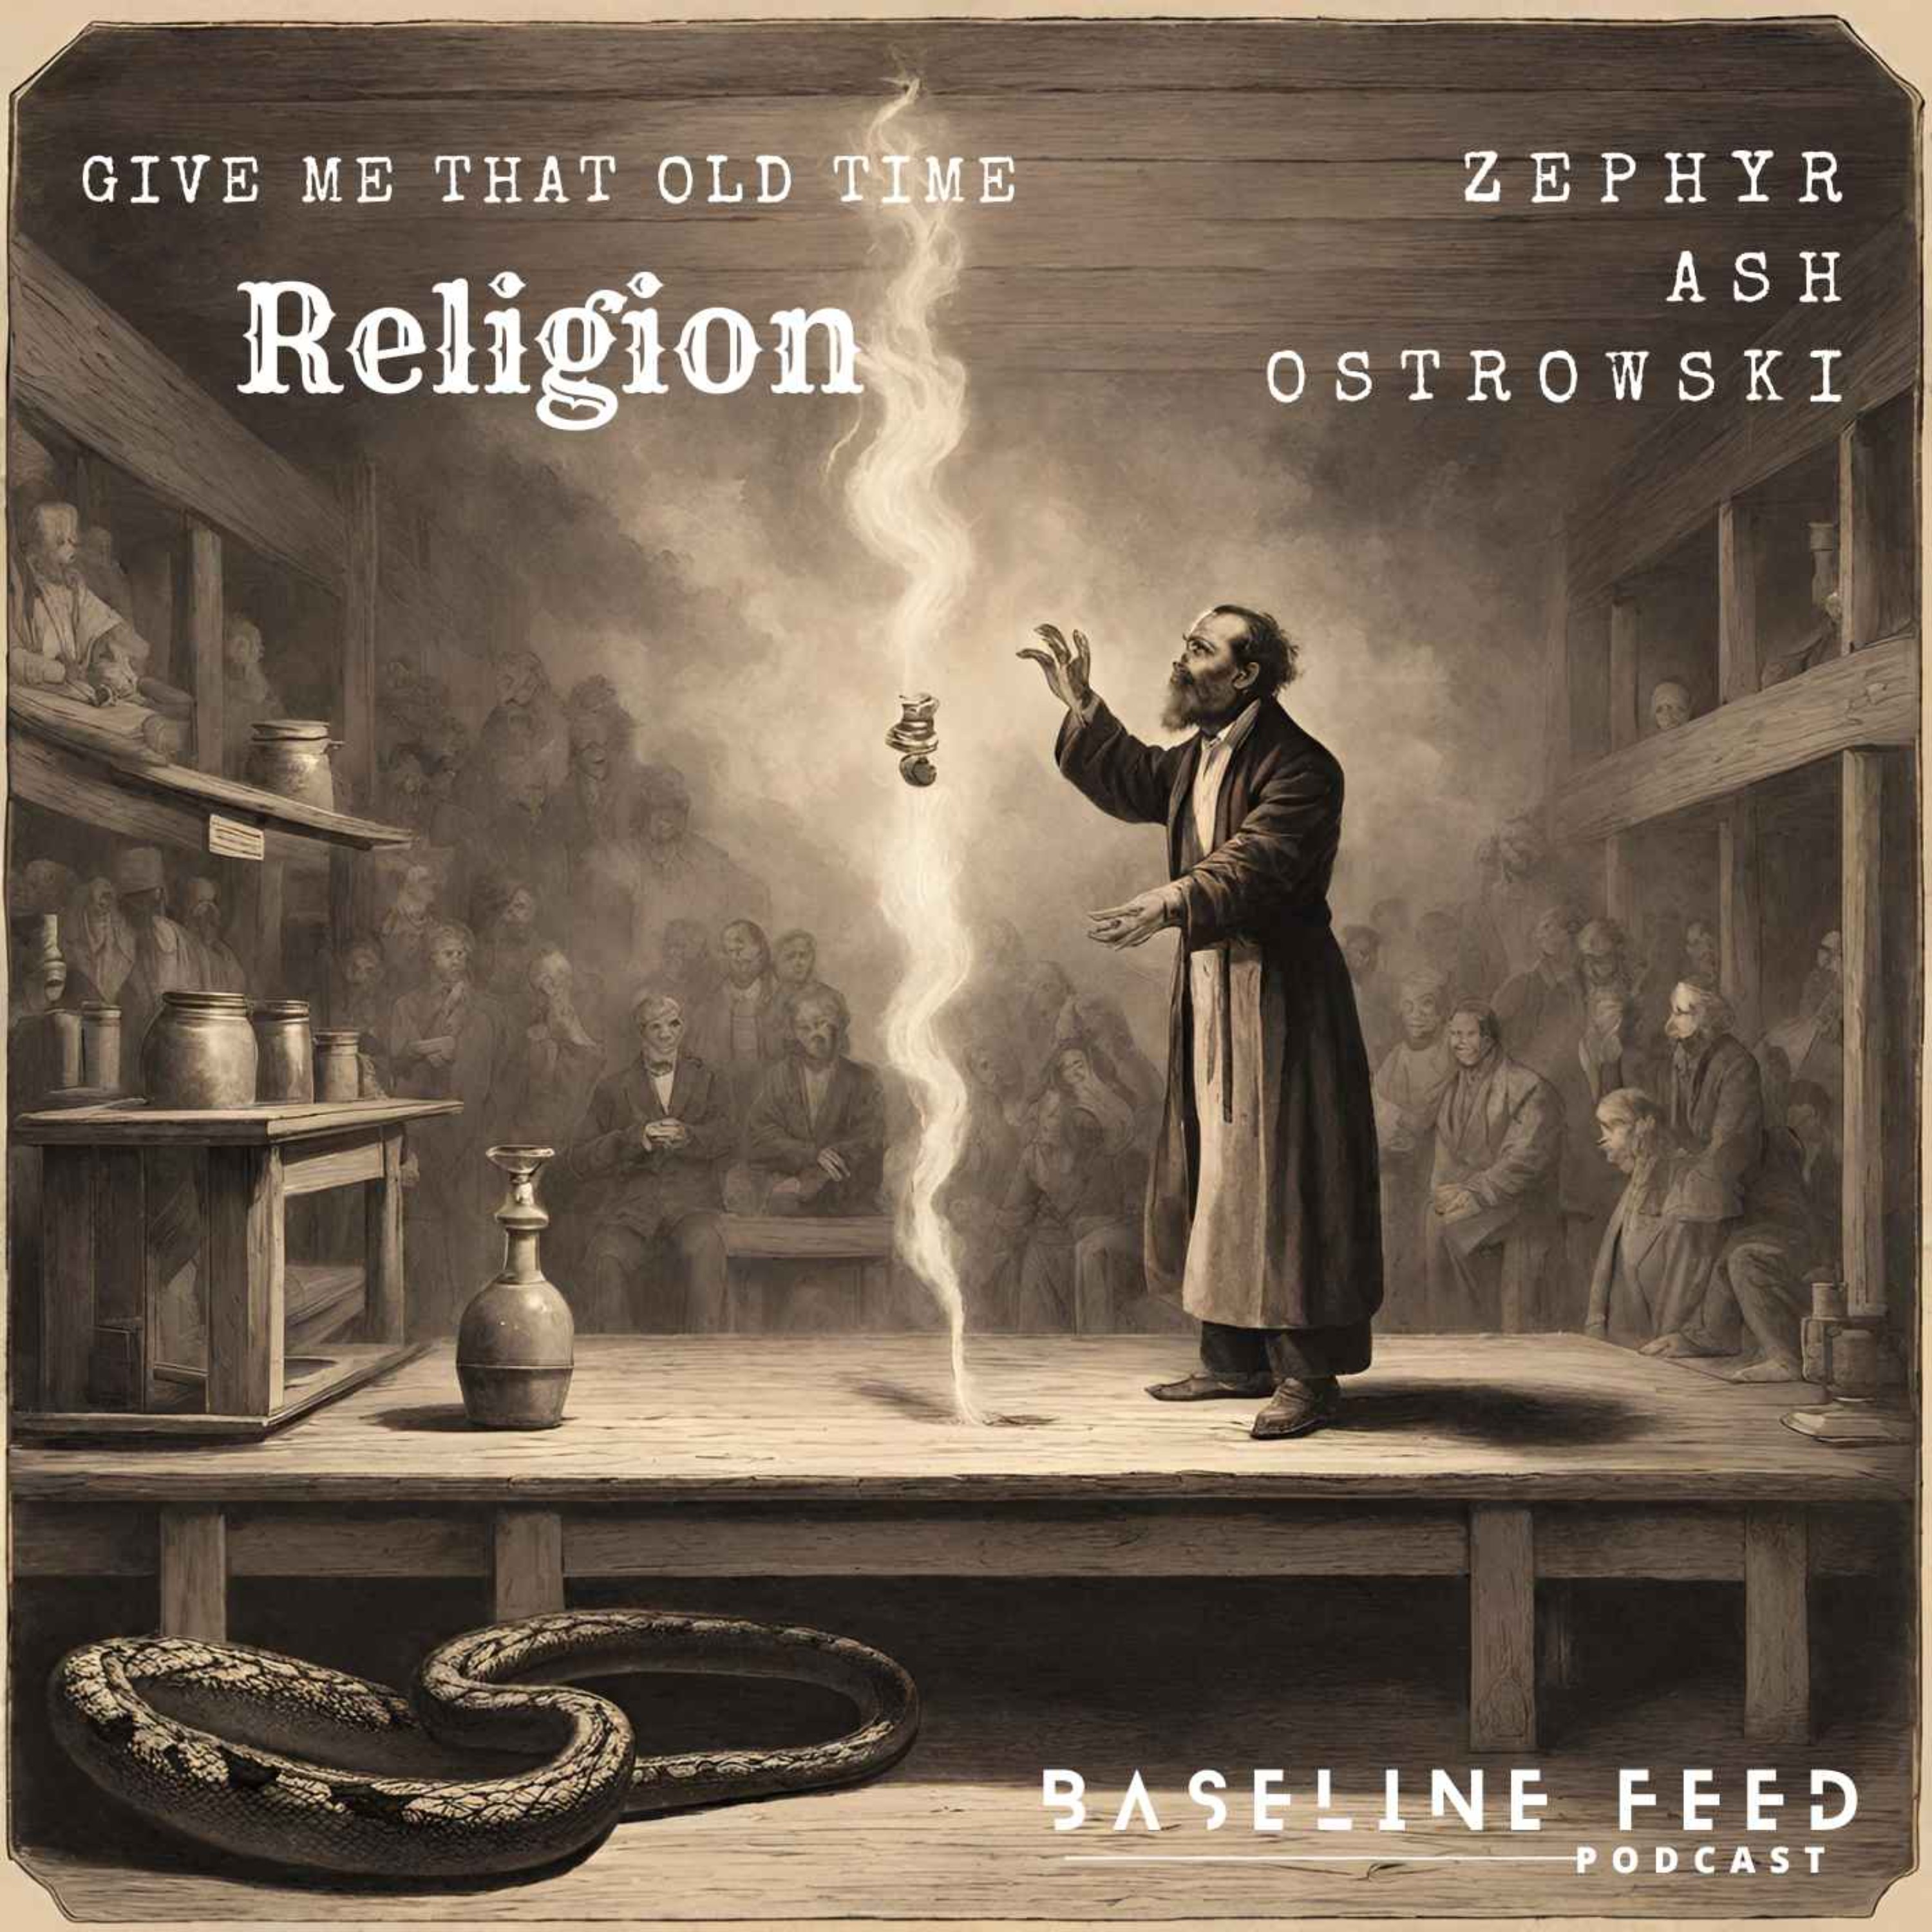 S3E6 - Give Me That Old Time Religion